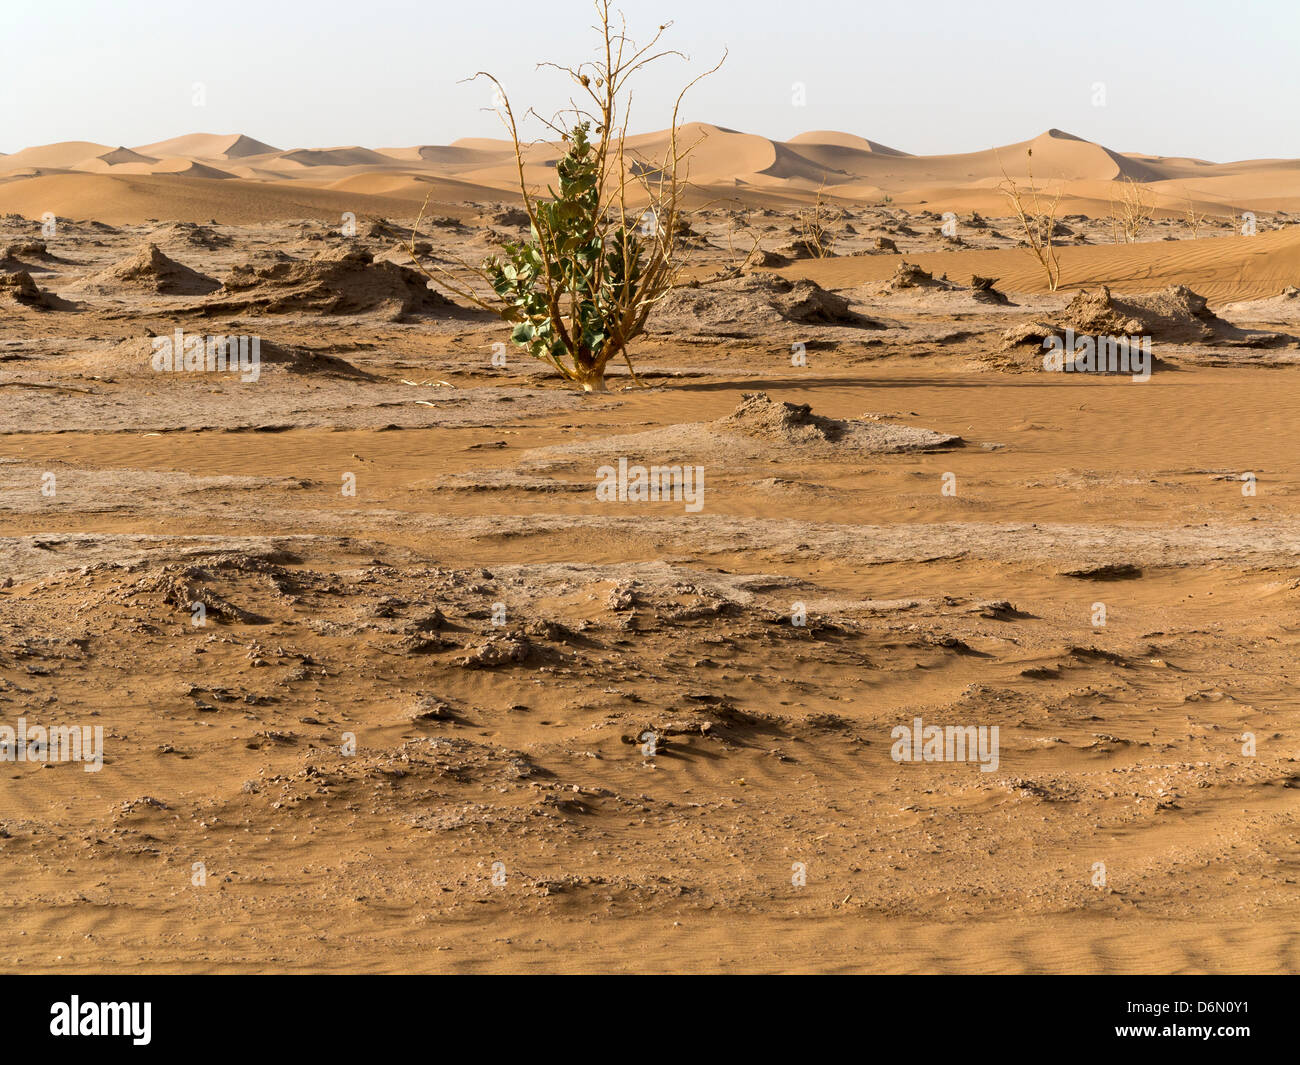 Moroccan landscape - looking across plains in southern Morocco Stock Photo